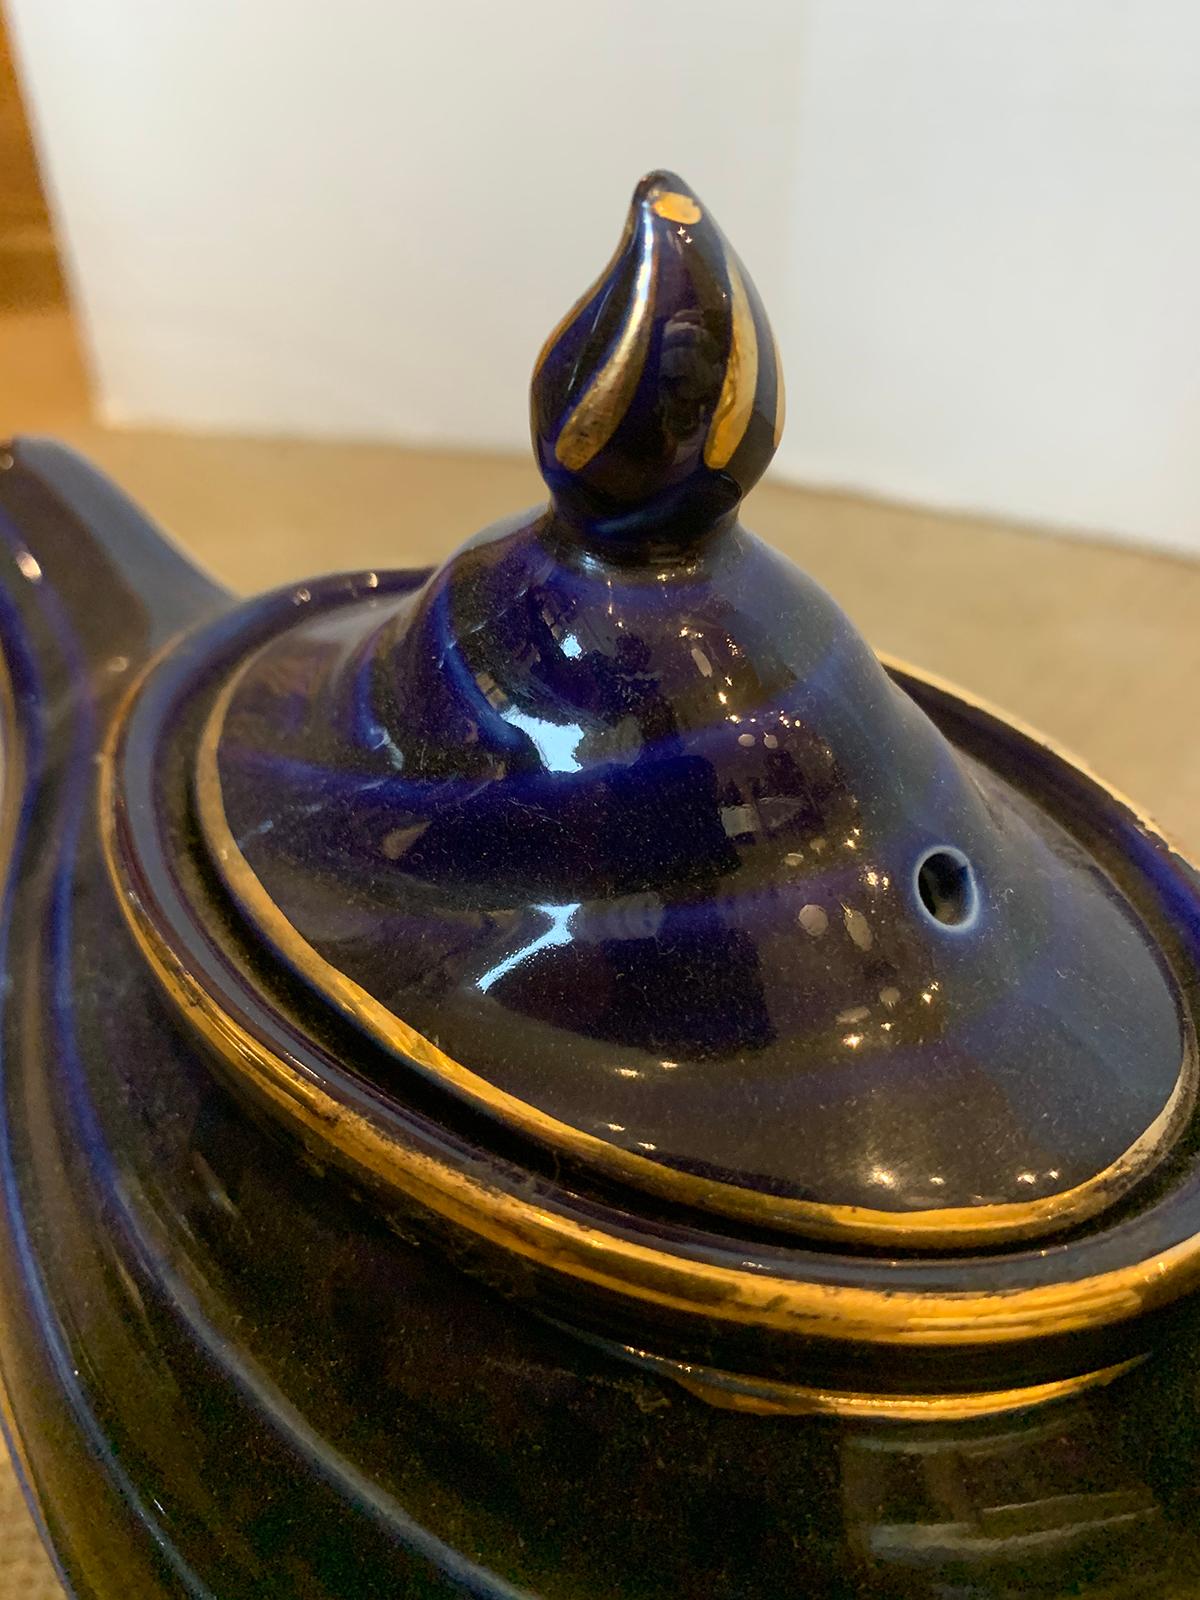 20th Century American Hall China Cobalt and Gilt Teapot, Marked 